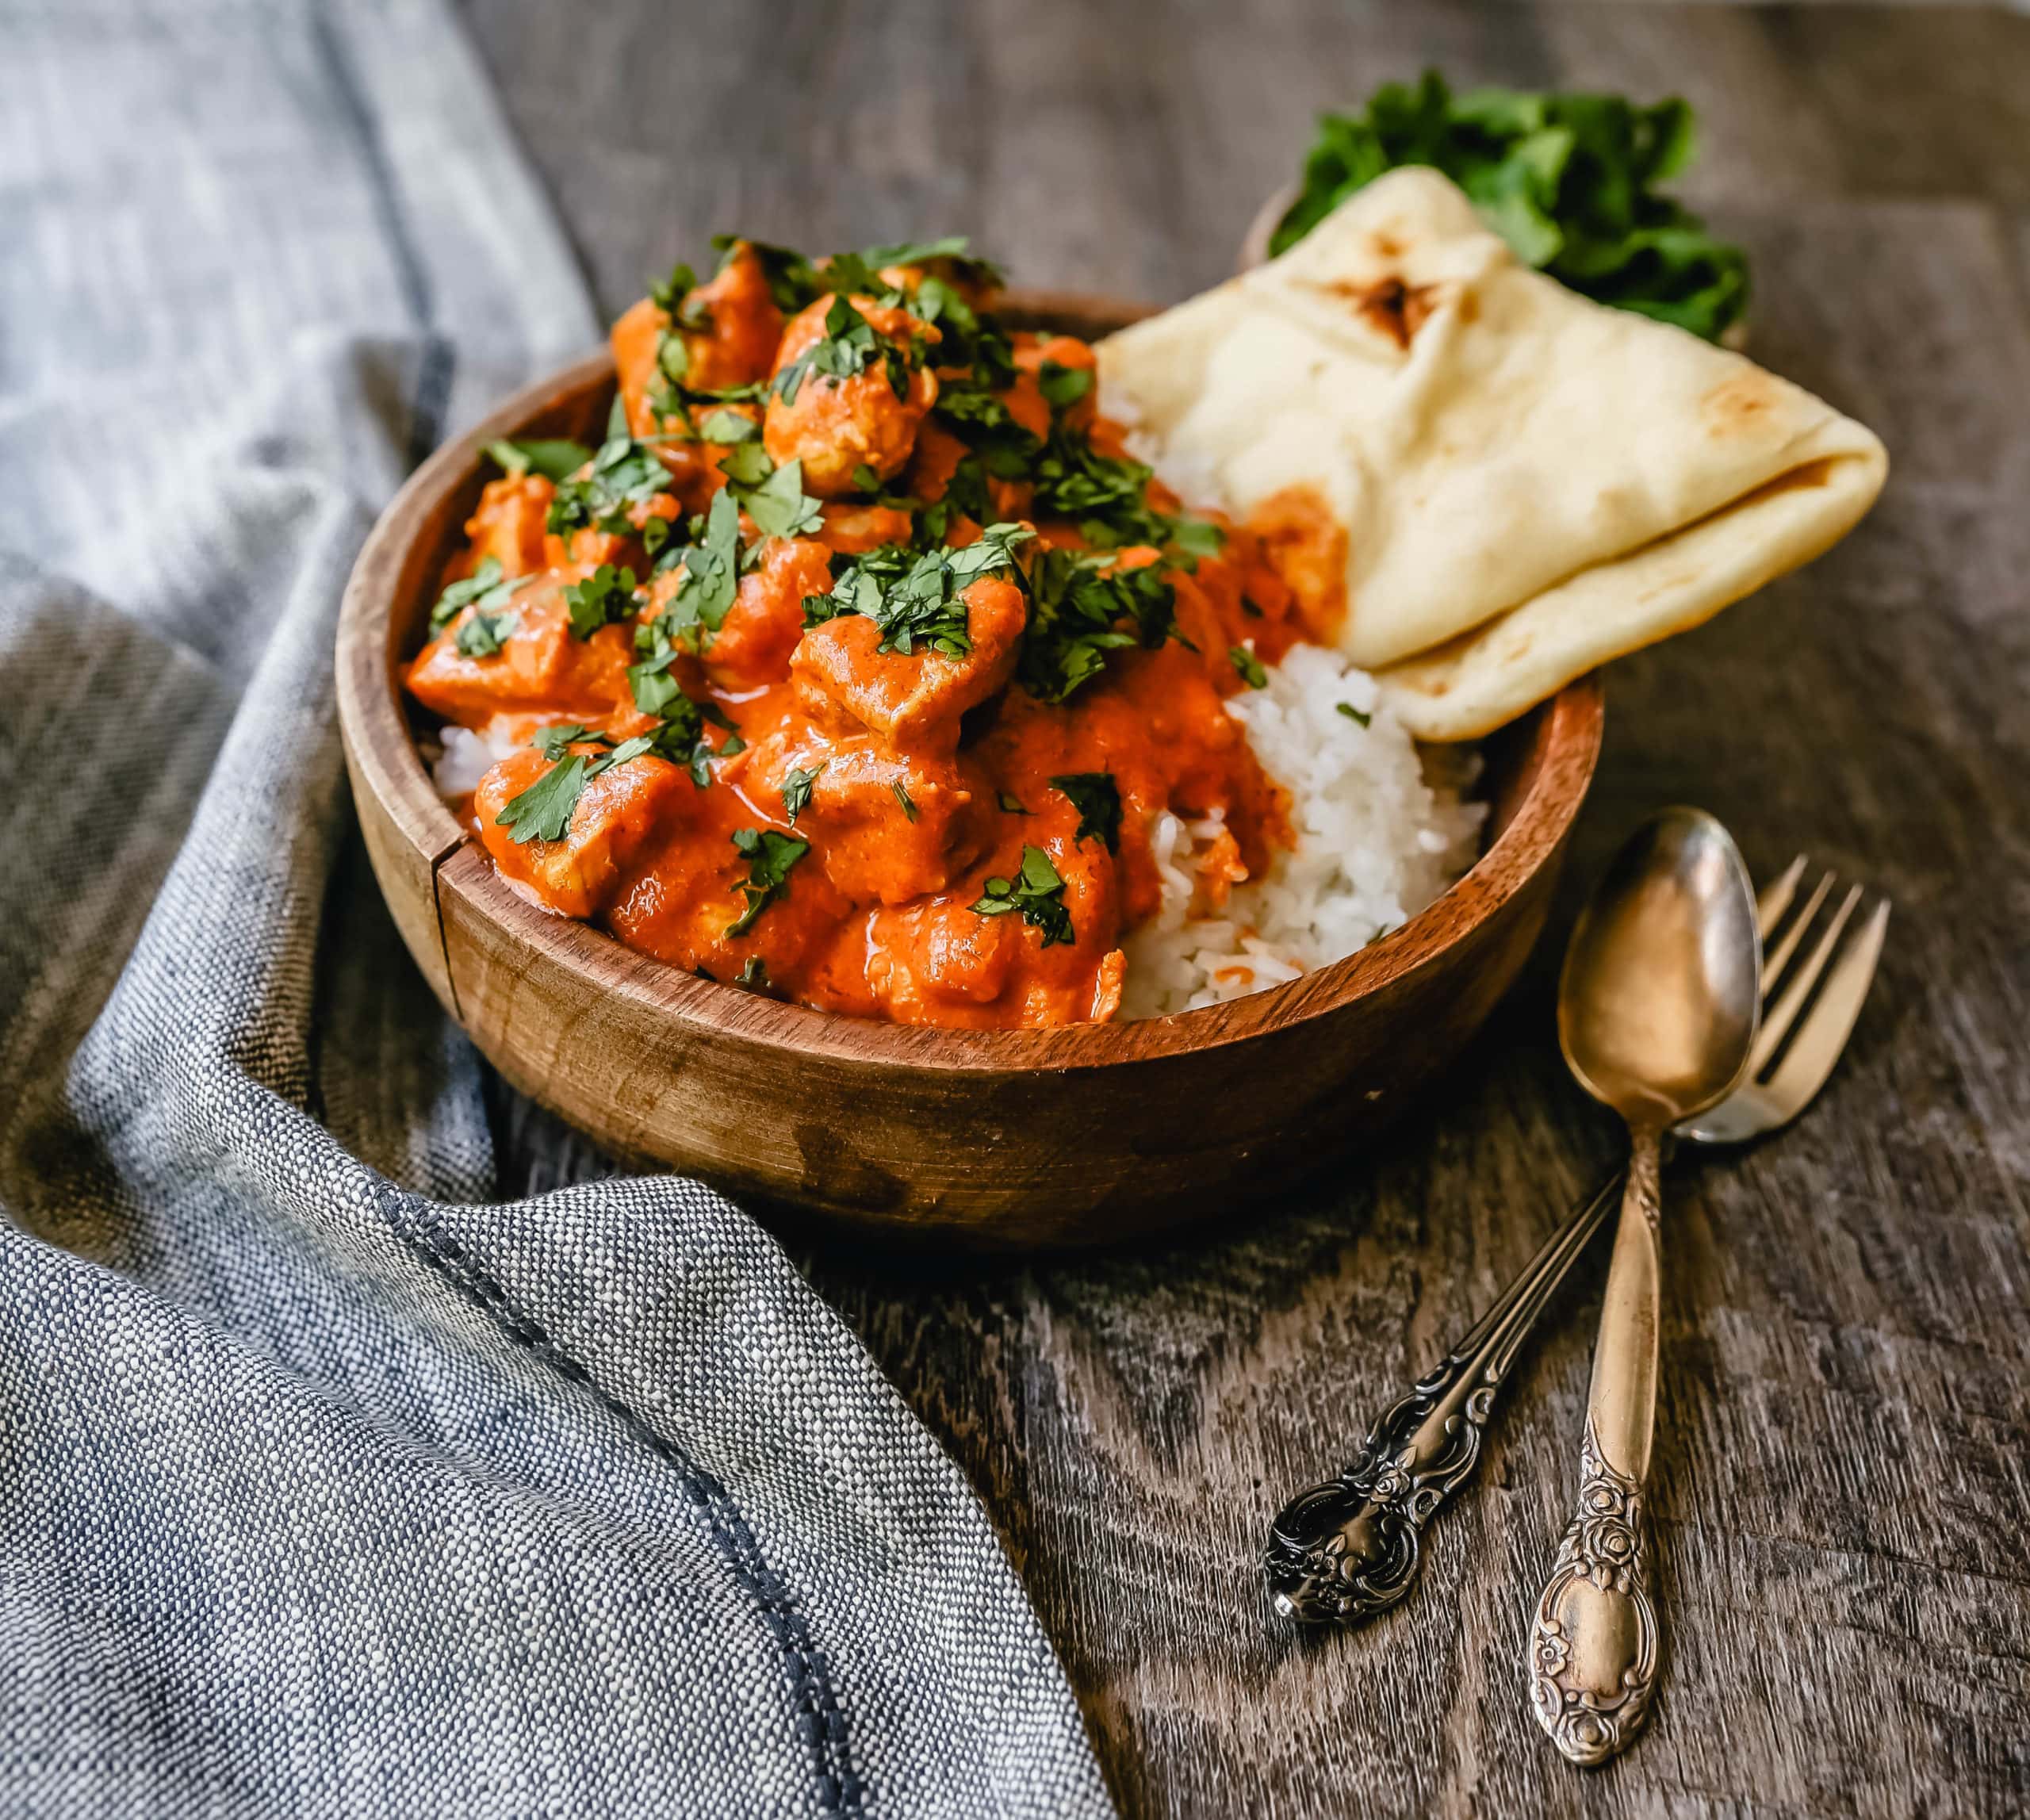 Indian Butter Chicken A popular Indian dish made with tender chicken simmered in a rich, Indian spiced tomato cream sauce. The Best Indian Butter Chicken Recipe! #indianfood #butterchicken 